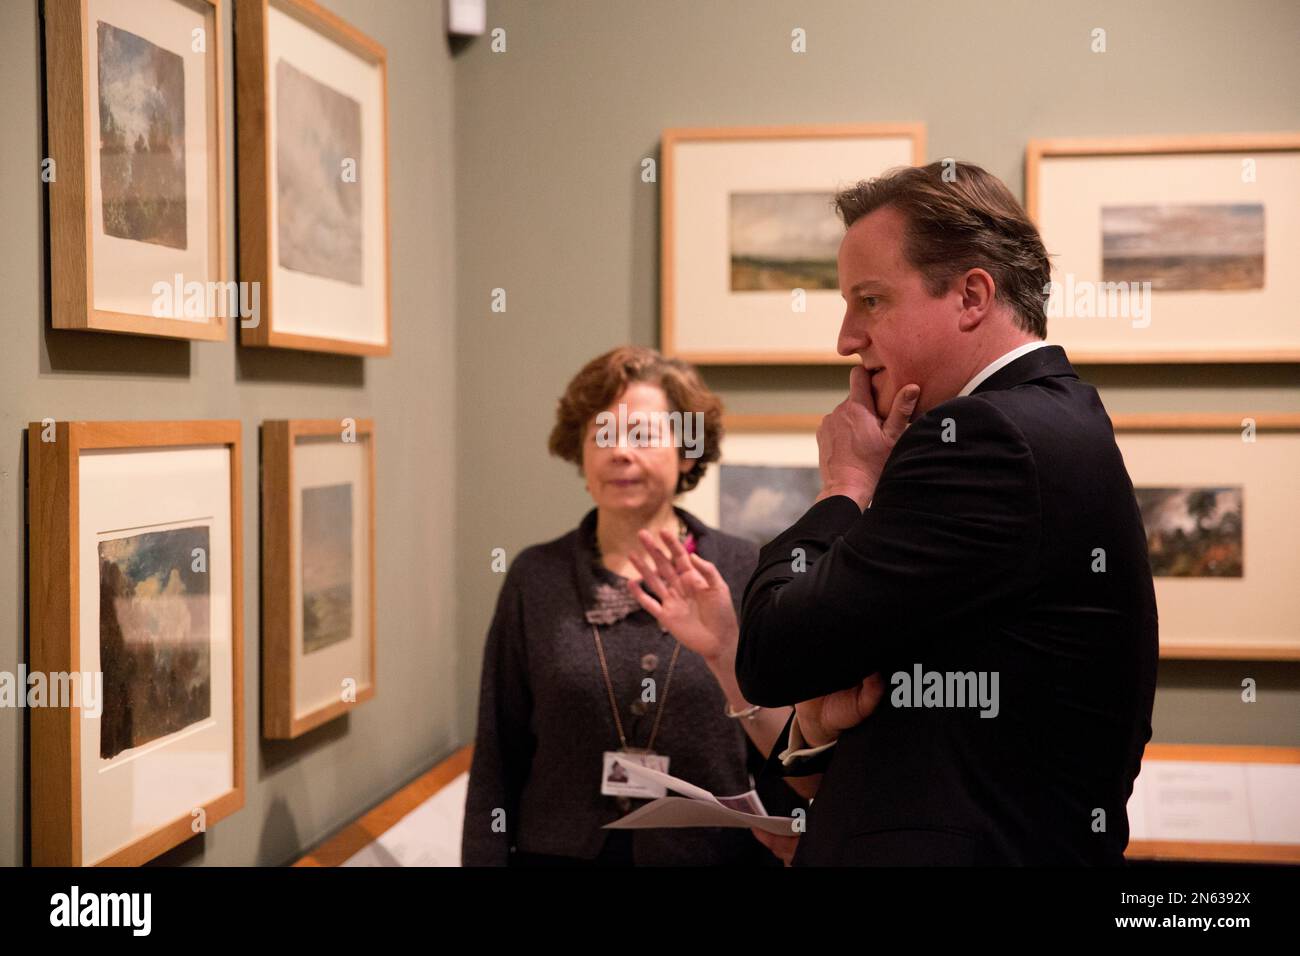 British Prime Minister David Cameron, right, is shown the newly discovered previously unknown oil sketch painting by John Constable entitled "Landscape with a Kiln" from 1821 or 1822 by Head Painting Conservator Nicola Costaras, below left, as an additional part of his visit to the "Masterpieces of Chinese Painting: 700-1900" at the Victoria & Albert Museum in London, Thursday, Nov. 28, 2013. The museum said it was discovered when conservators attempted to remove the lining on the back of "Branch Hill Pond: Hampstead", another work by the English romantic painter known for his landscapes, whil Stockfoto